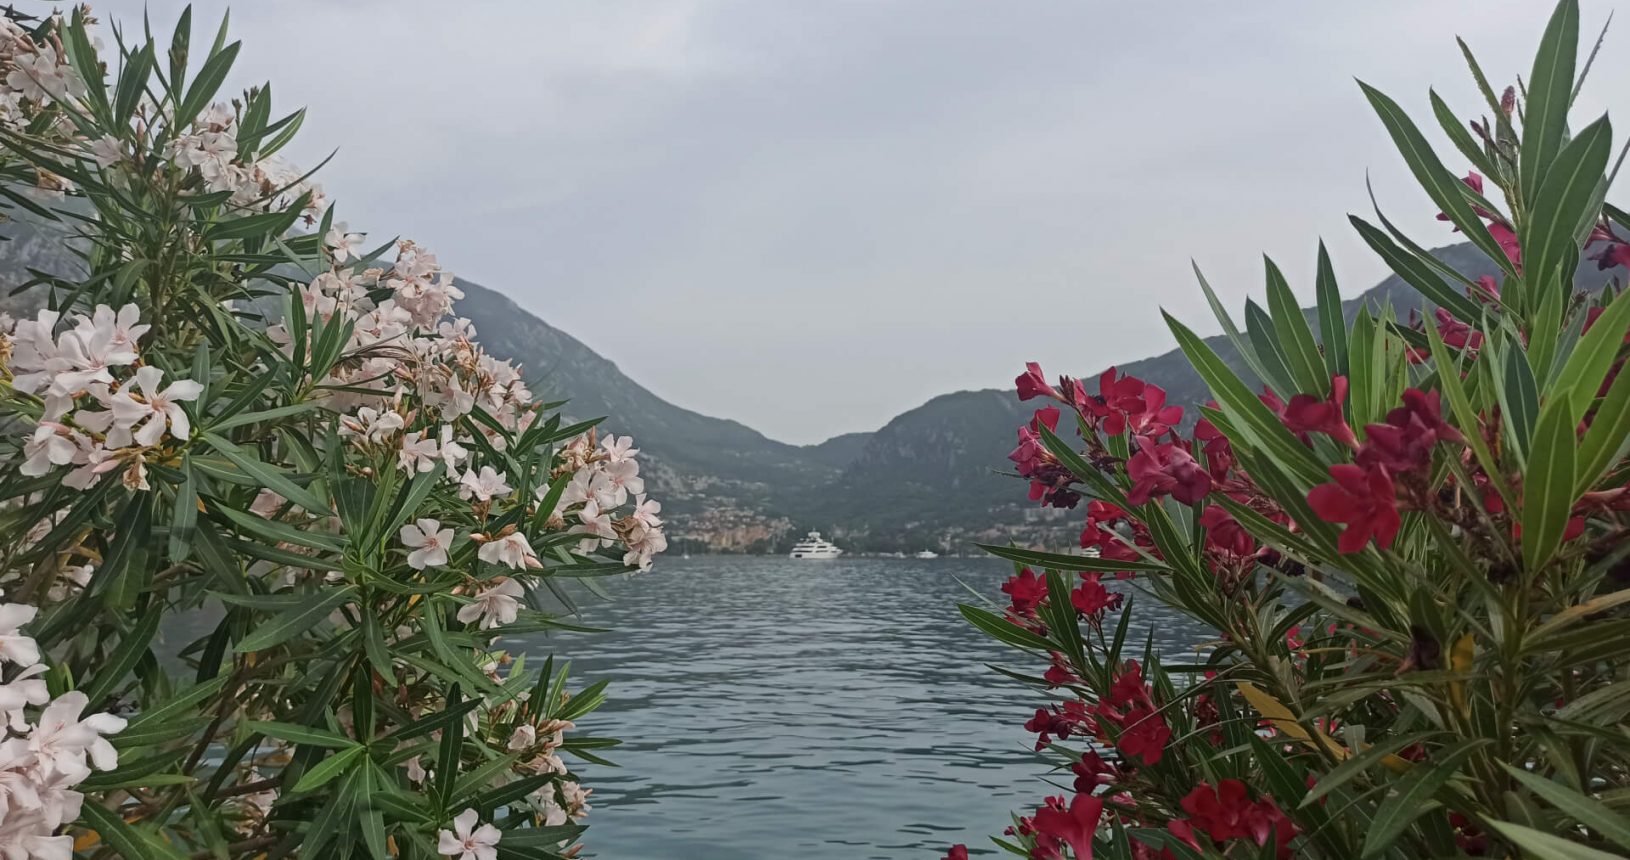 The bay of Kotor from between flowers